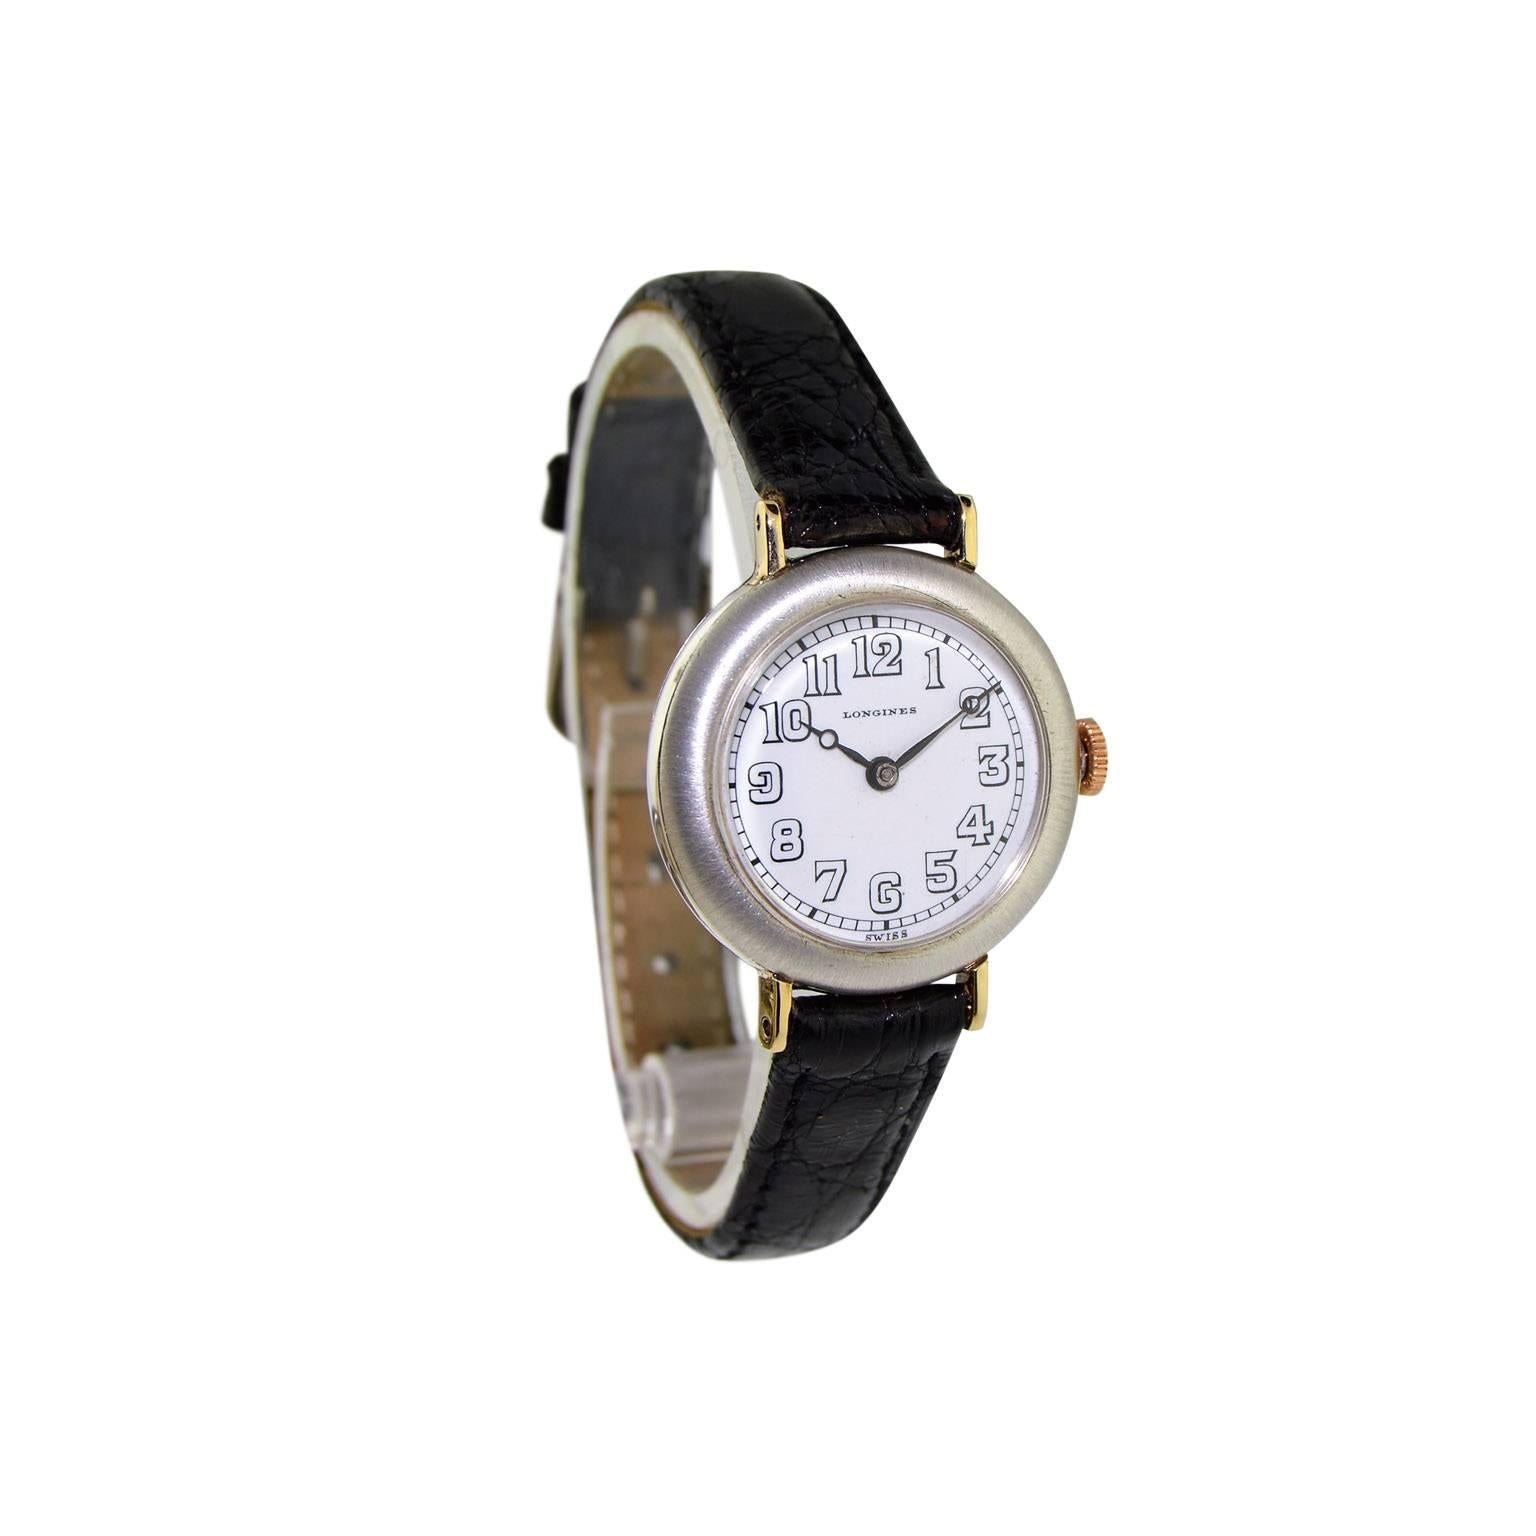 FACTORY / HOUSE: Longines Watch Company
STYLE / REFERENCE: Art Deco / Round
METAL / MATERIAL: Sterling Silver / Rose Gold Lugs
DIMENSIONS:  34mm X 29mm
CIRCA: 1912
MOVEMENT / CALIBER: Manual Winding / 17 Jewels 
DIAL / HANDS: Original / 